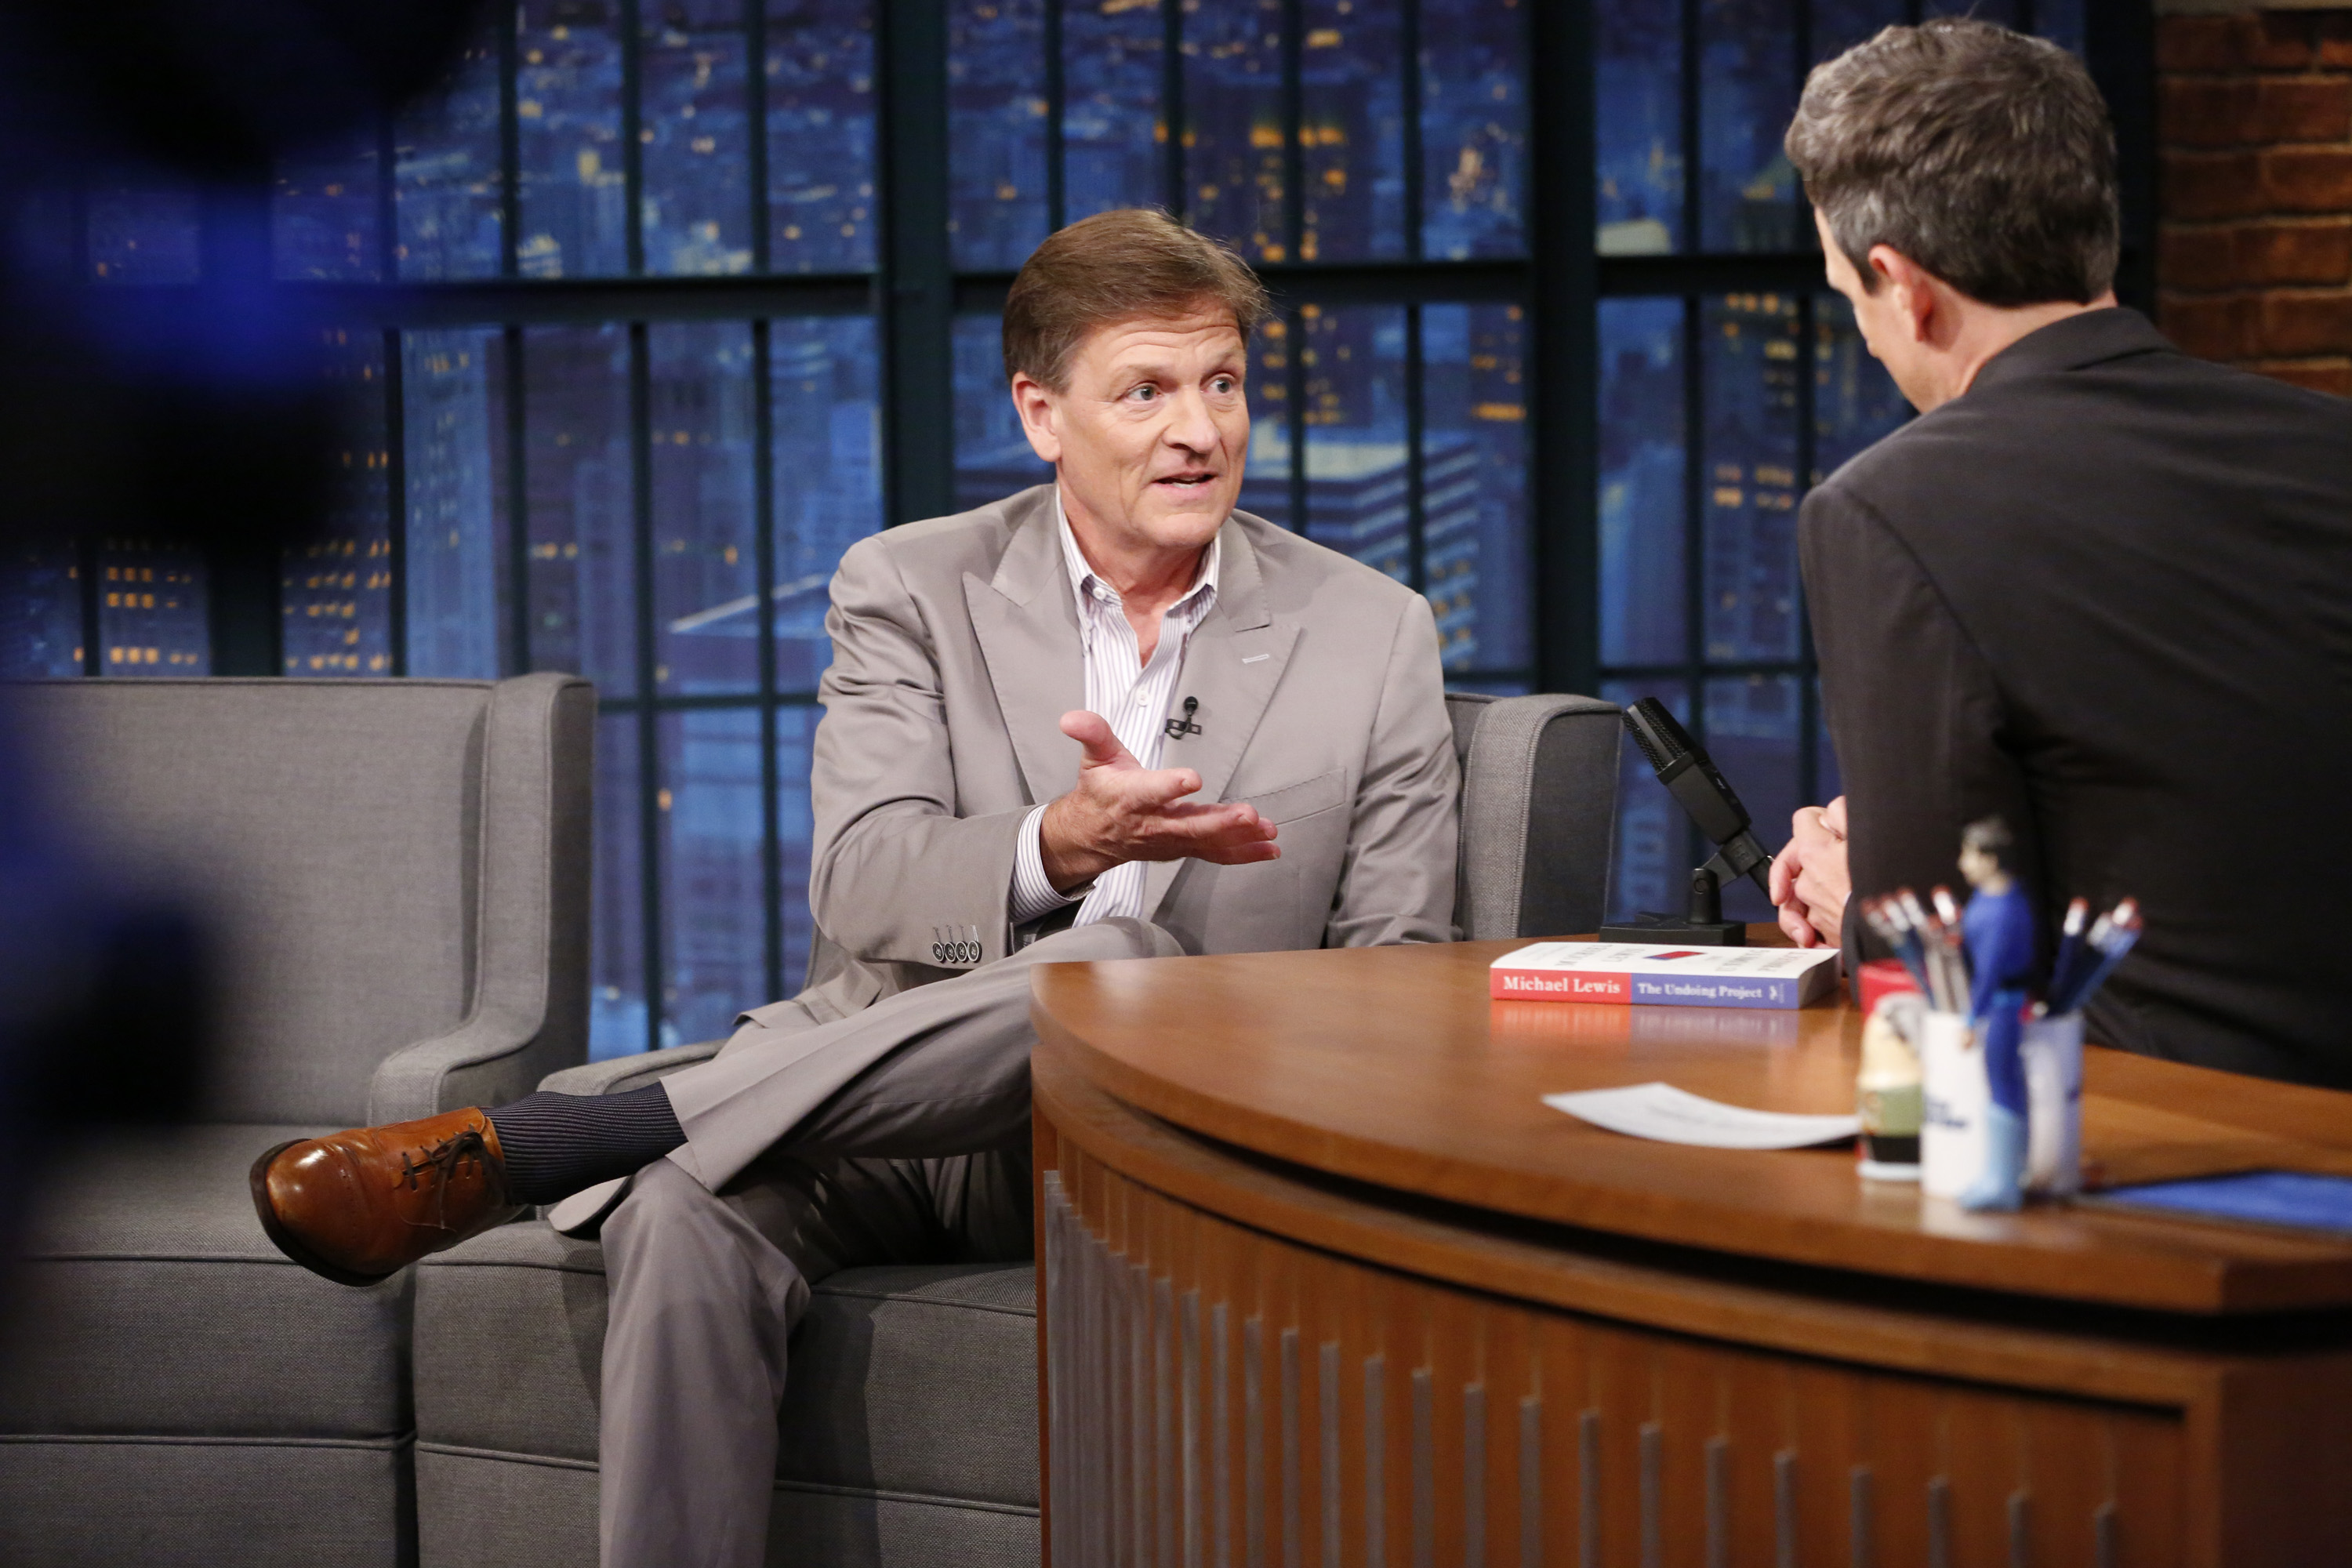 'Moneyball' Author Michael Lewis: How I Knew When to Quit a Fancy Wall Street Job to Follow My Dream